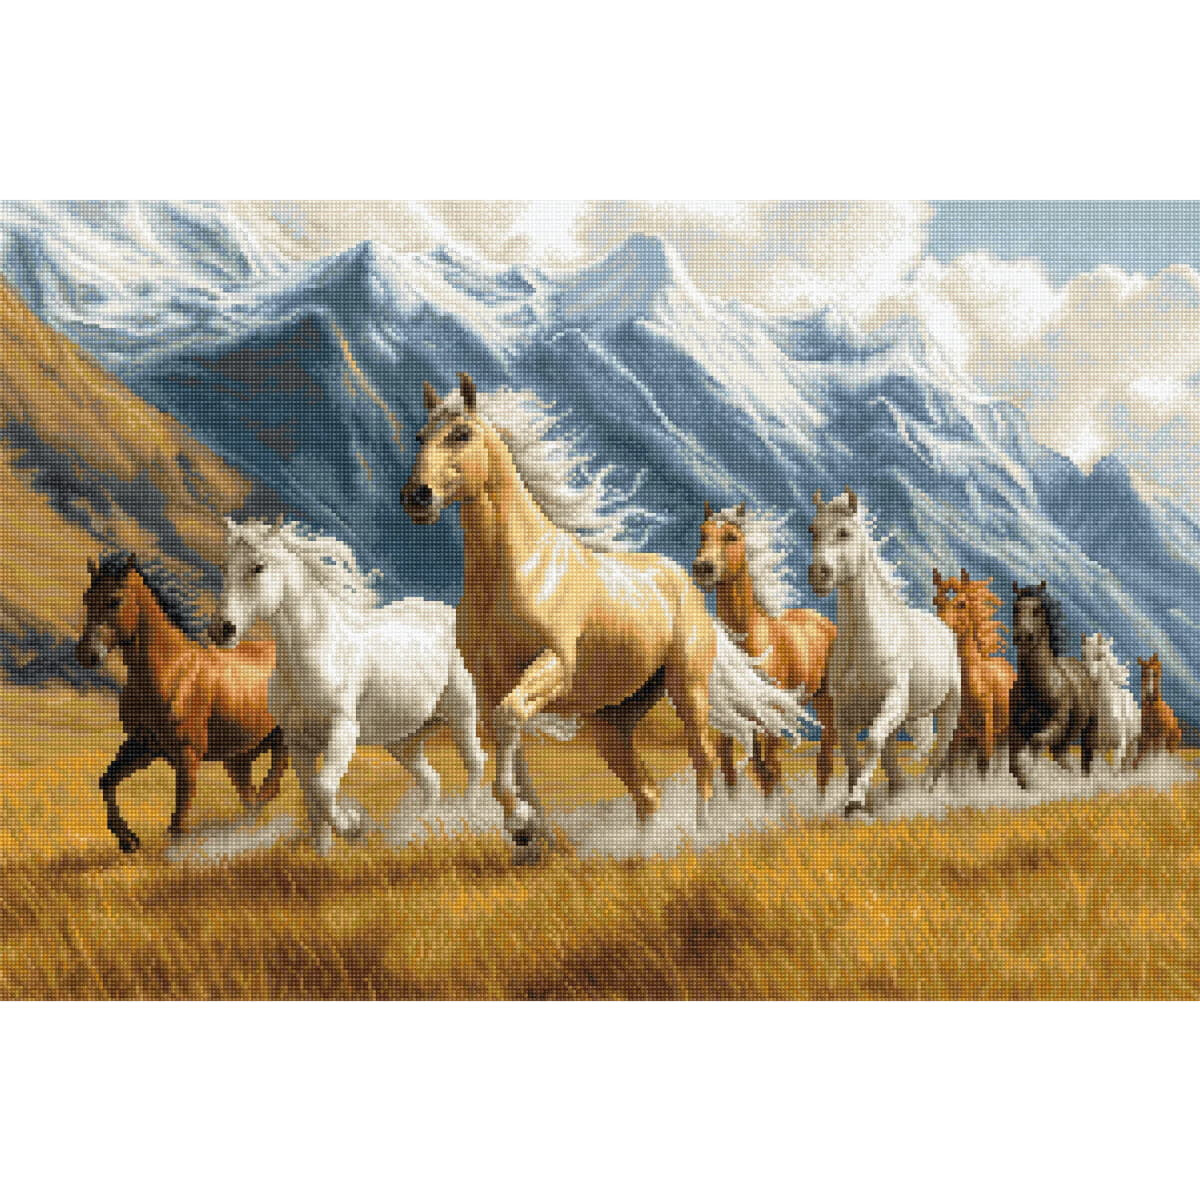 A herd of horses gallops across a golden field with...